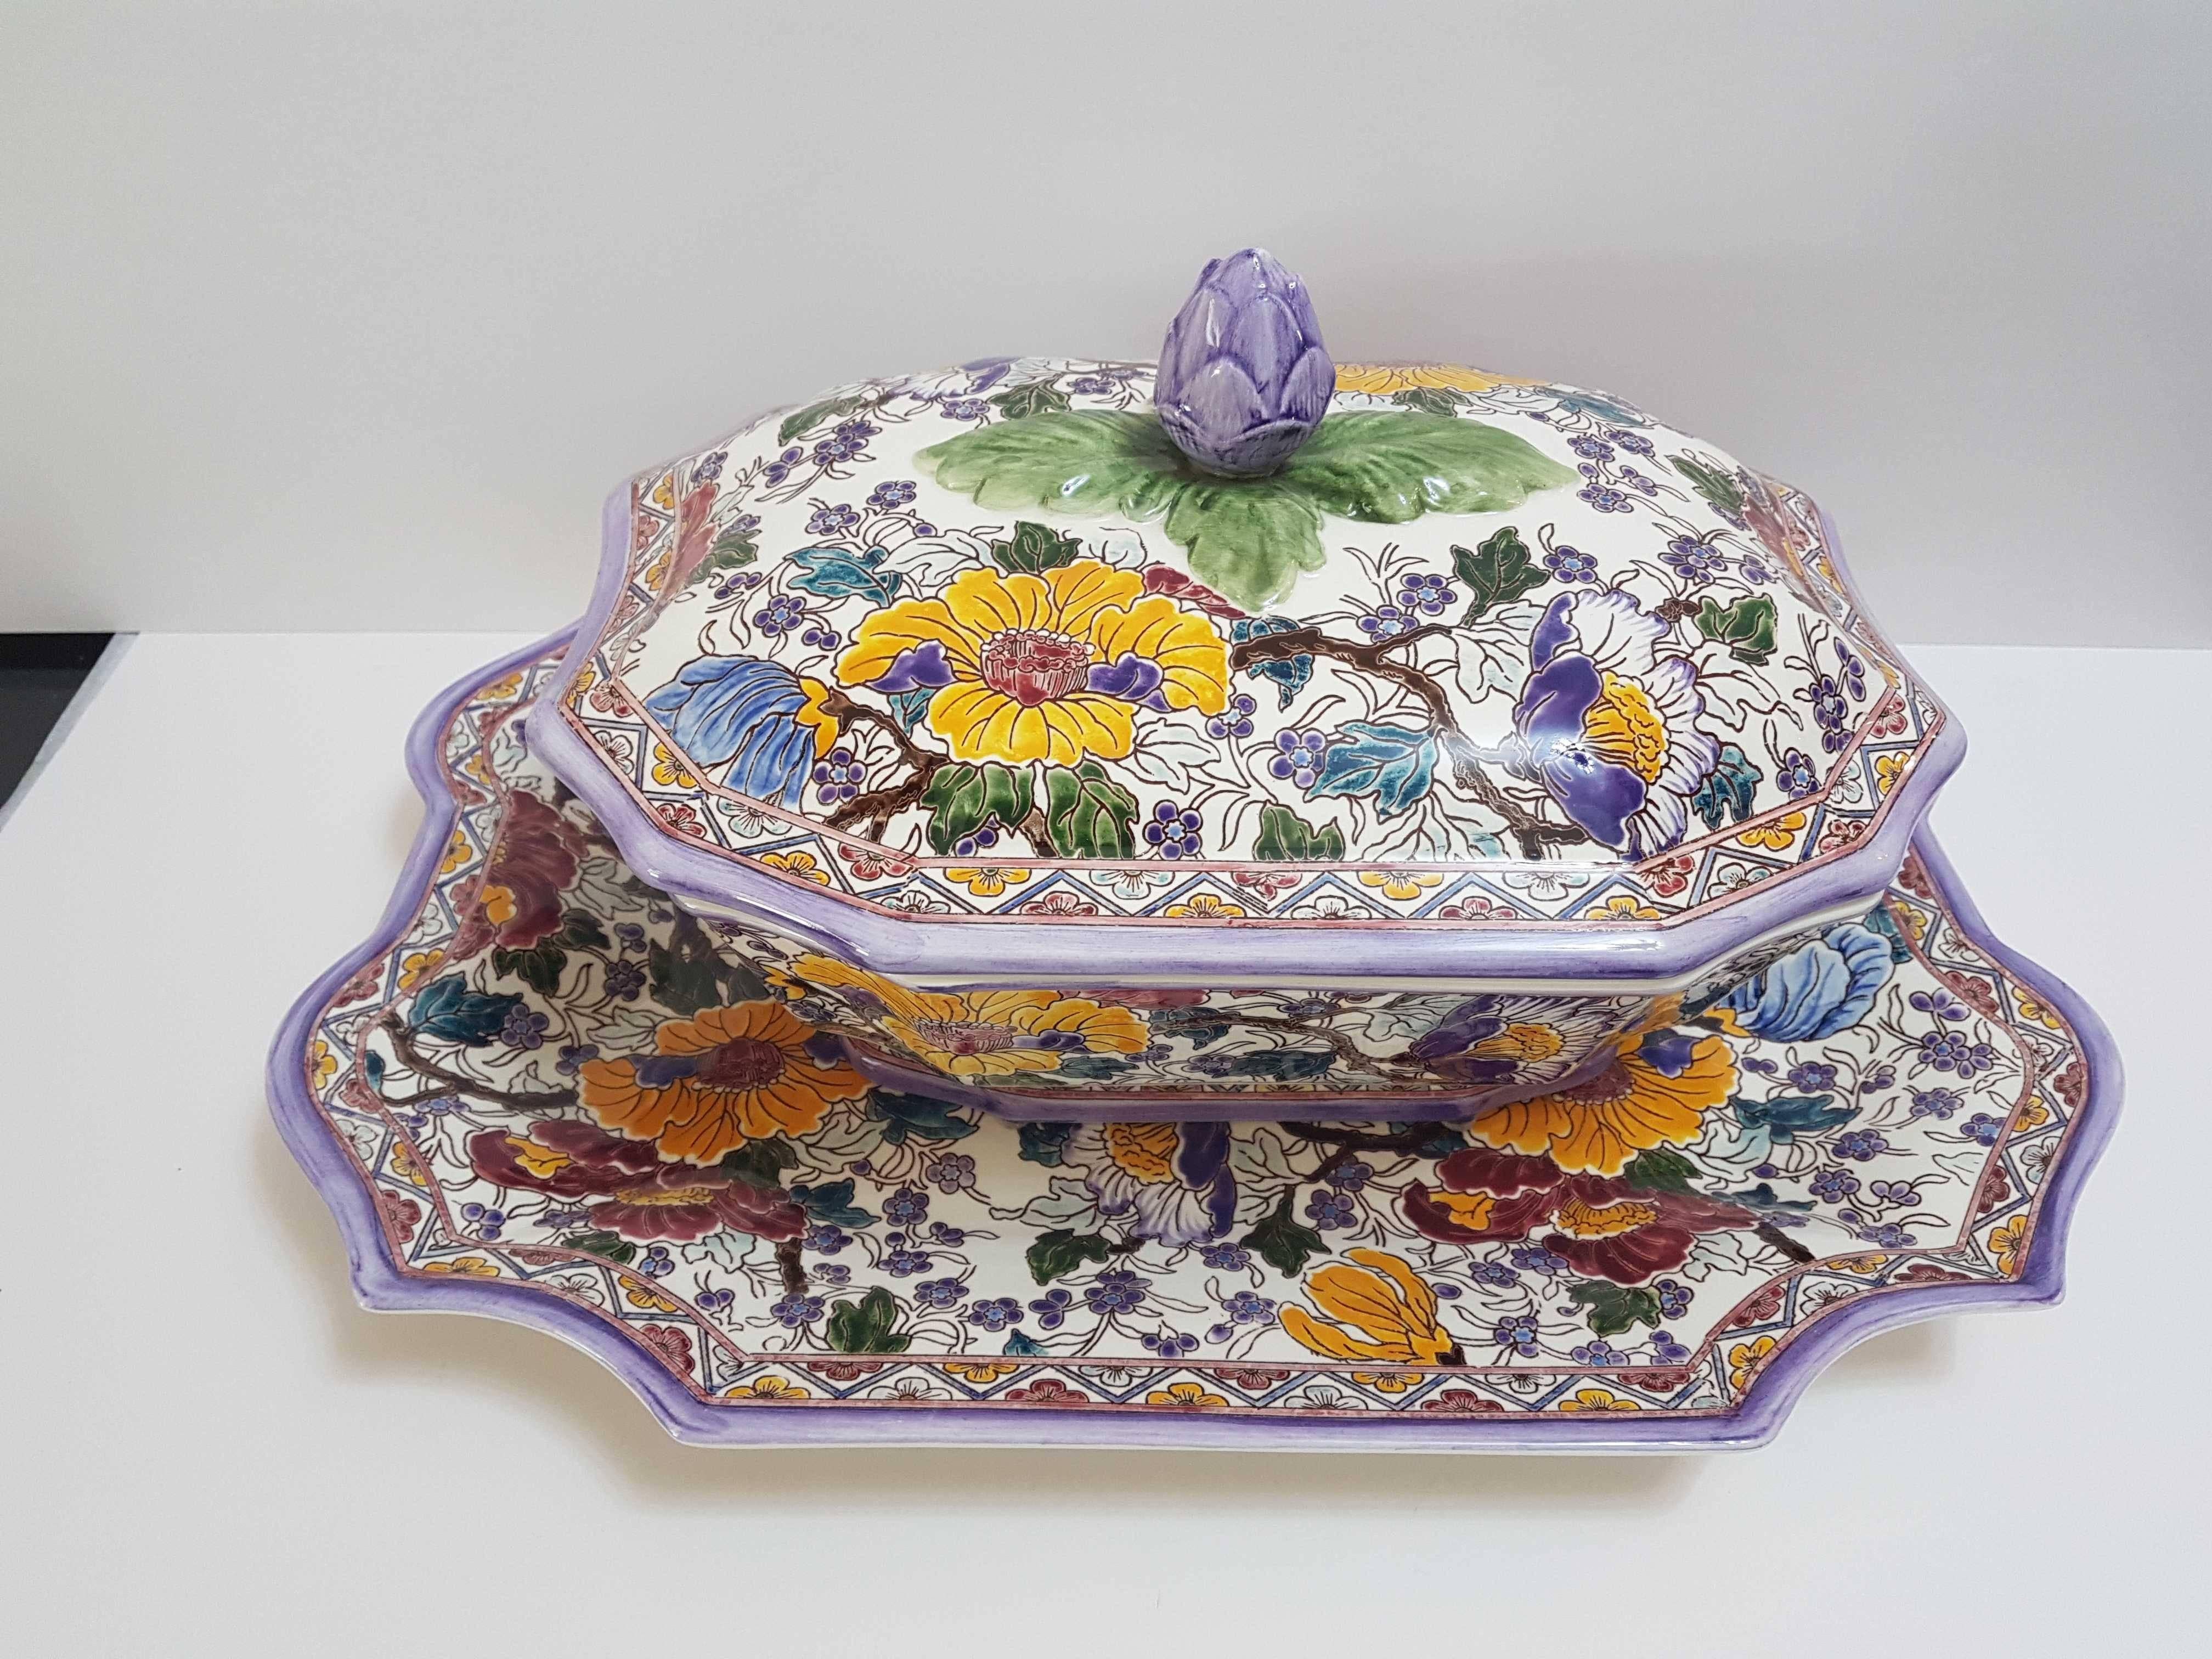 Magnificent hand-painted soup tureen and stand copied from a 19th century model taken from the archives at the Faiencerie Museum in Louis XV style.
Limited edition in mauve color of the pattern Pivoine: piece n° 28 of 70.
Year: 2007.